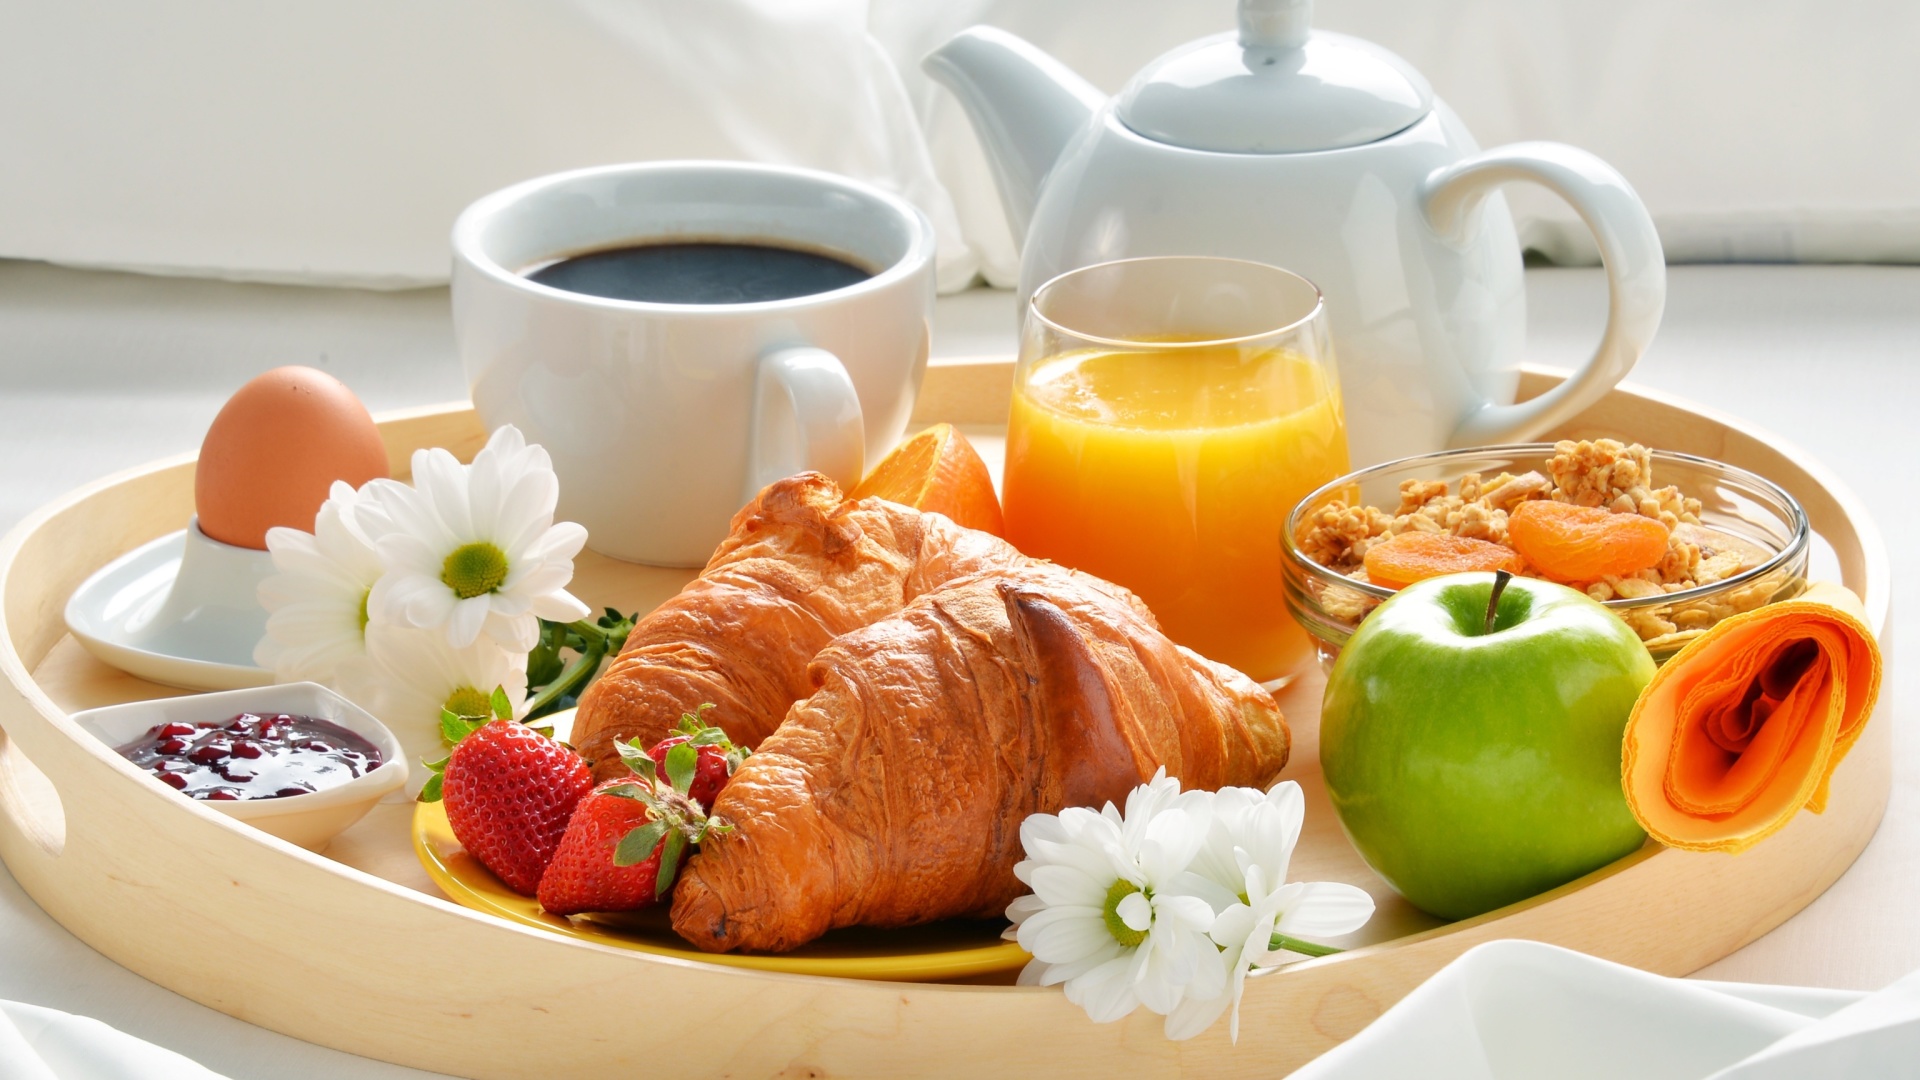 Das Breakfast with croissant and musli Wallpaper 1920x1080